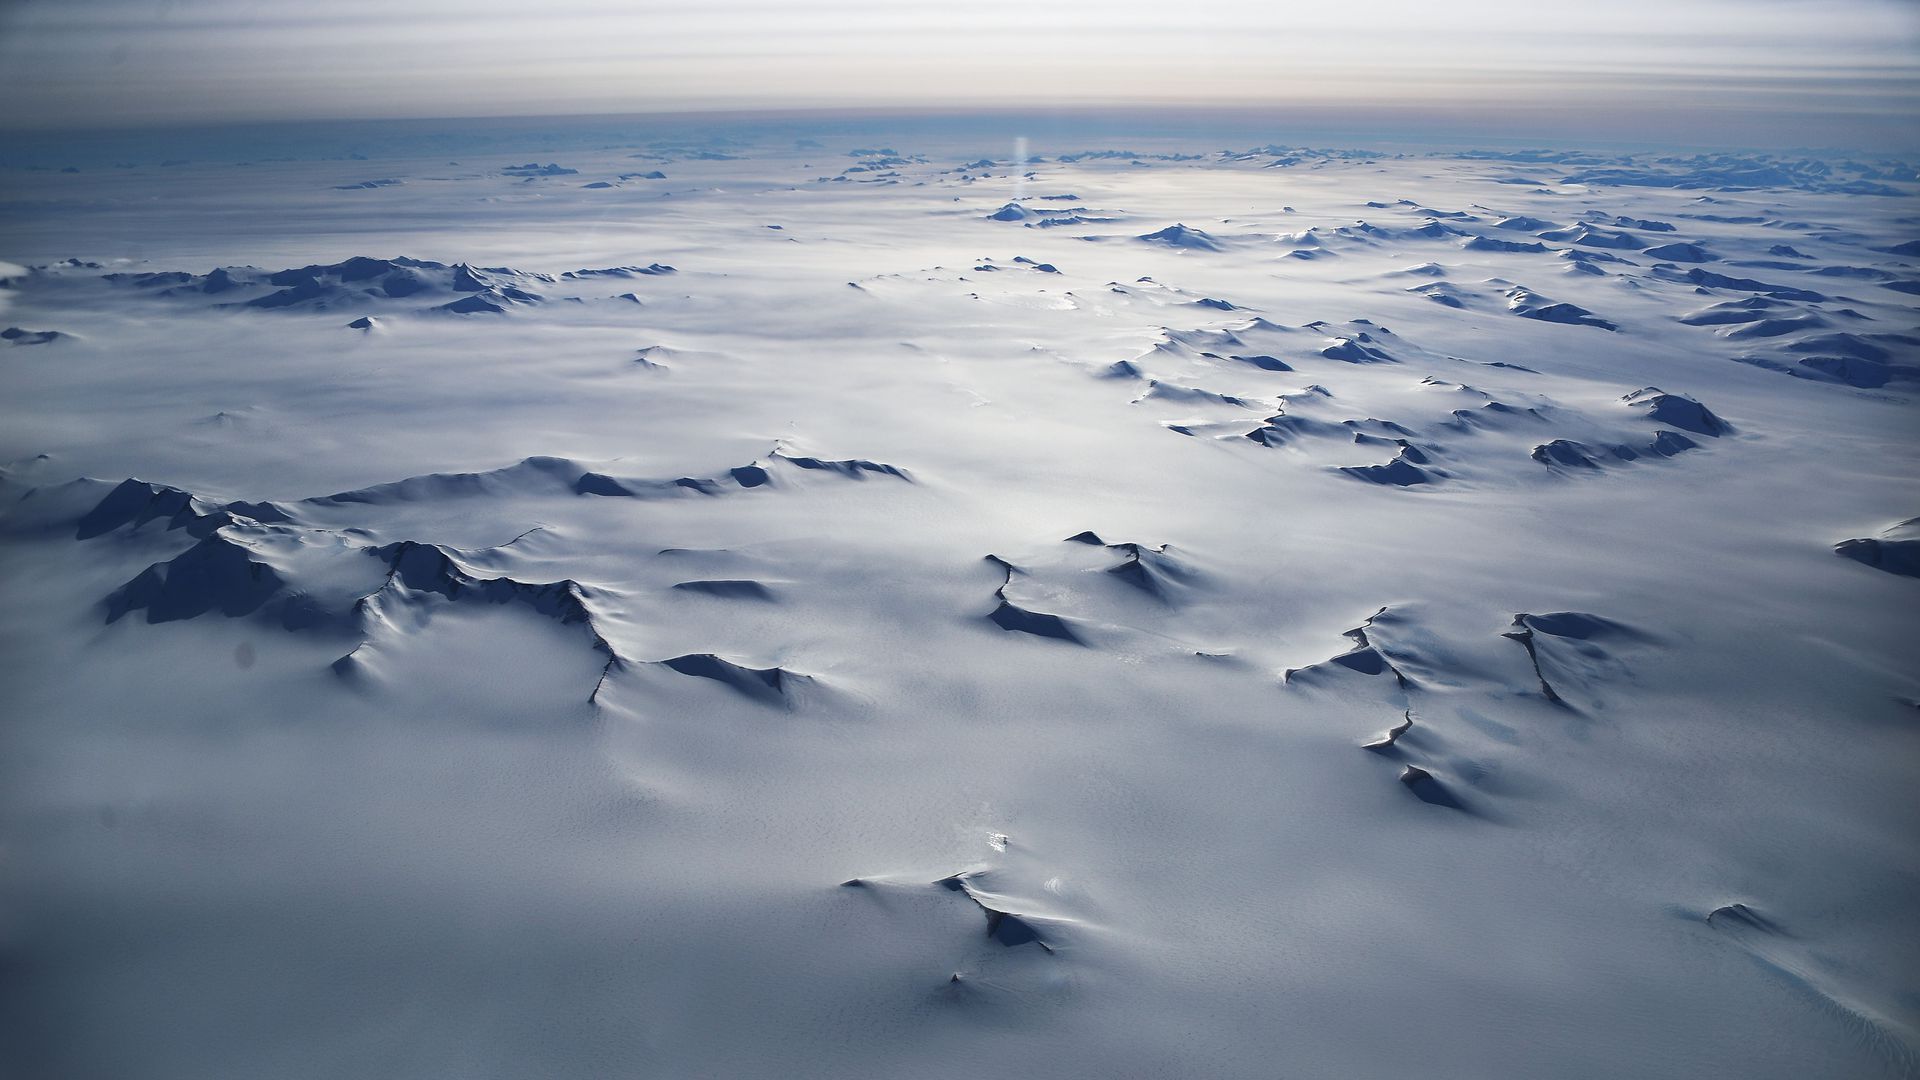 Mountain peaks are seen from NASA's Operation IceBridge research aircraft in the Antarctic Peninsula region, on Nov. 4, 2017, above Antarctica. Photo: Mario Tama/Getty Images